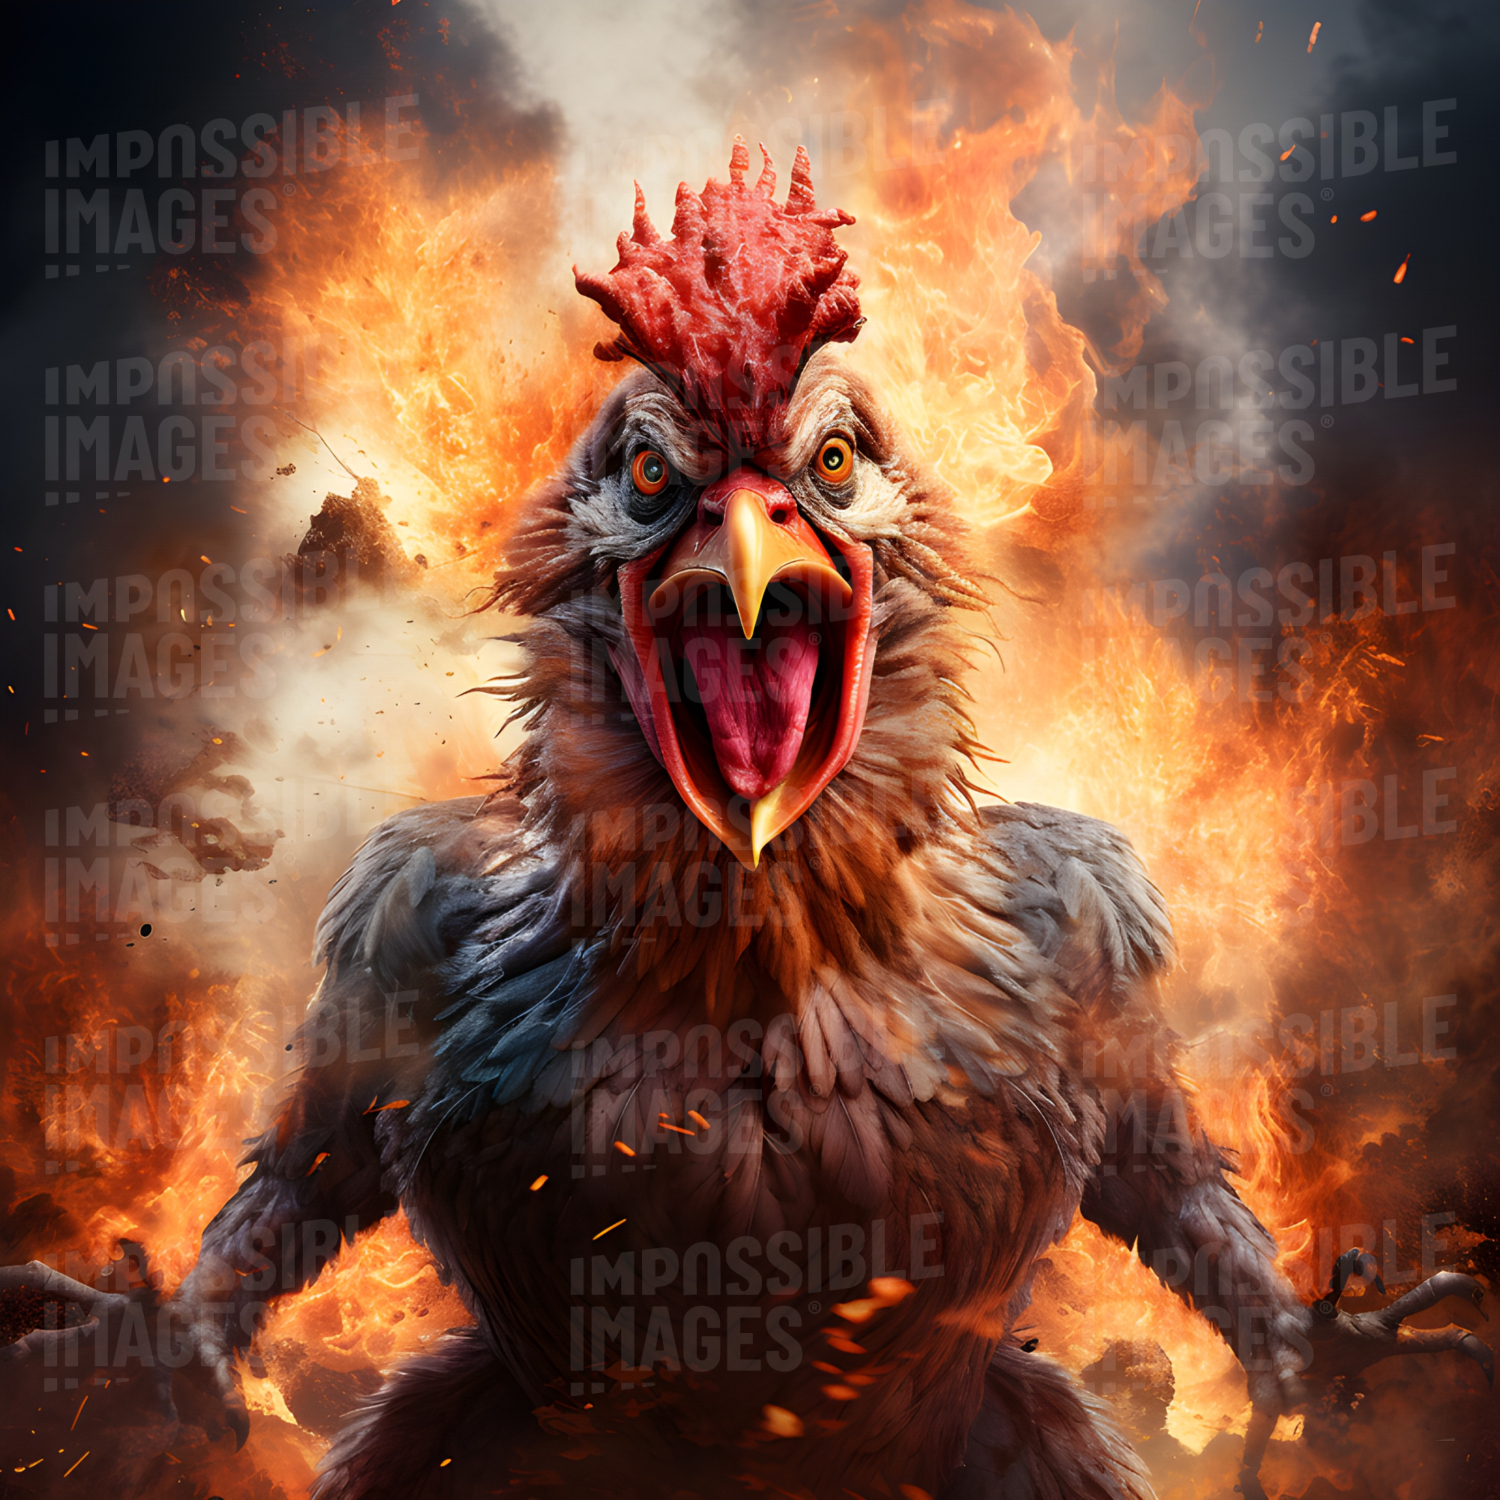 Feel the wrath of the chicken -  The chickens are angry! Feel their wrath as they peck and scratch, determined to get revenge on those who have wronged them. Beware their fury and prepare to face the consequences of your actions.